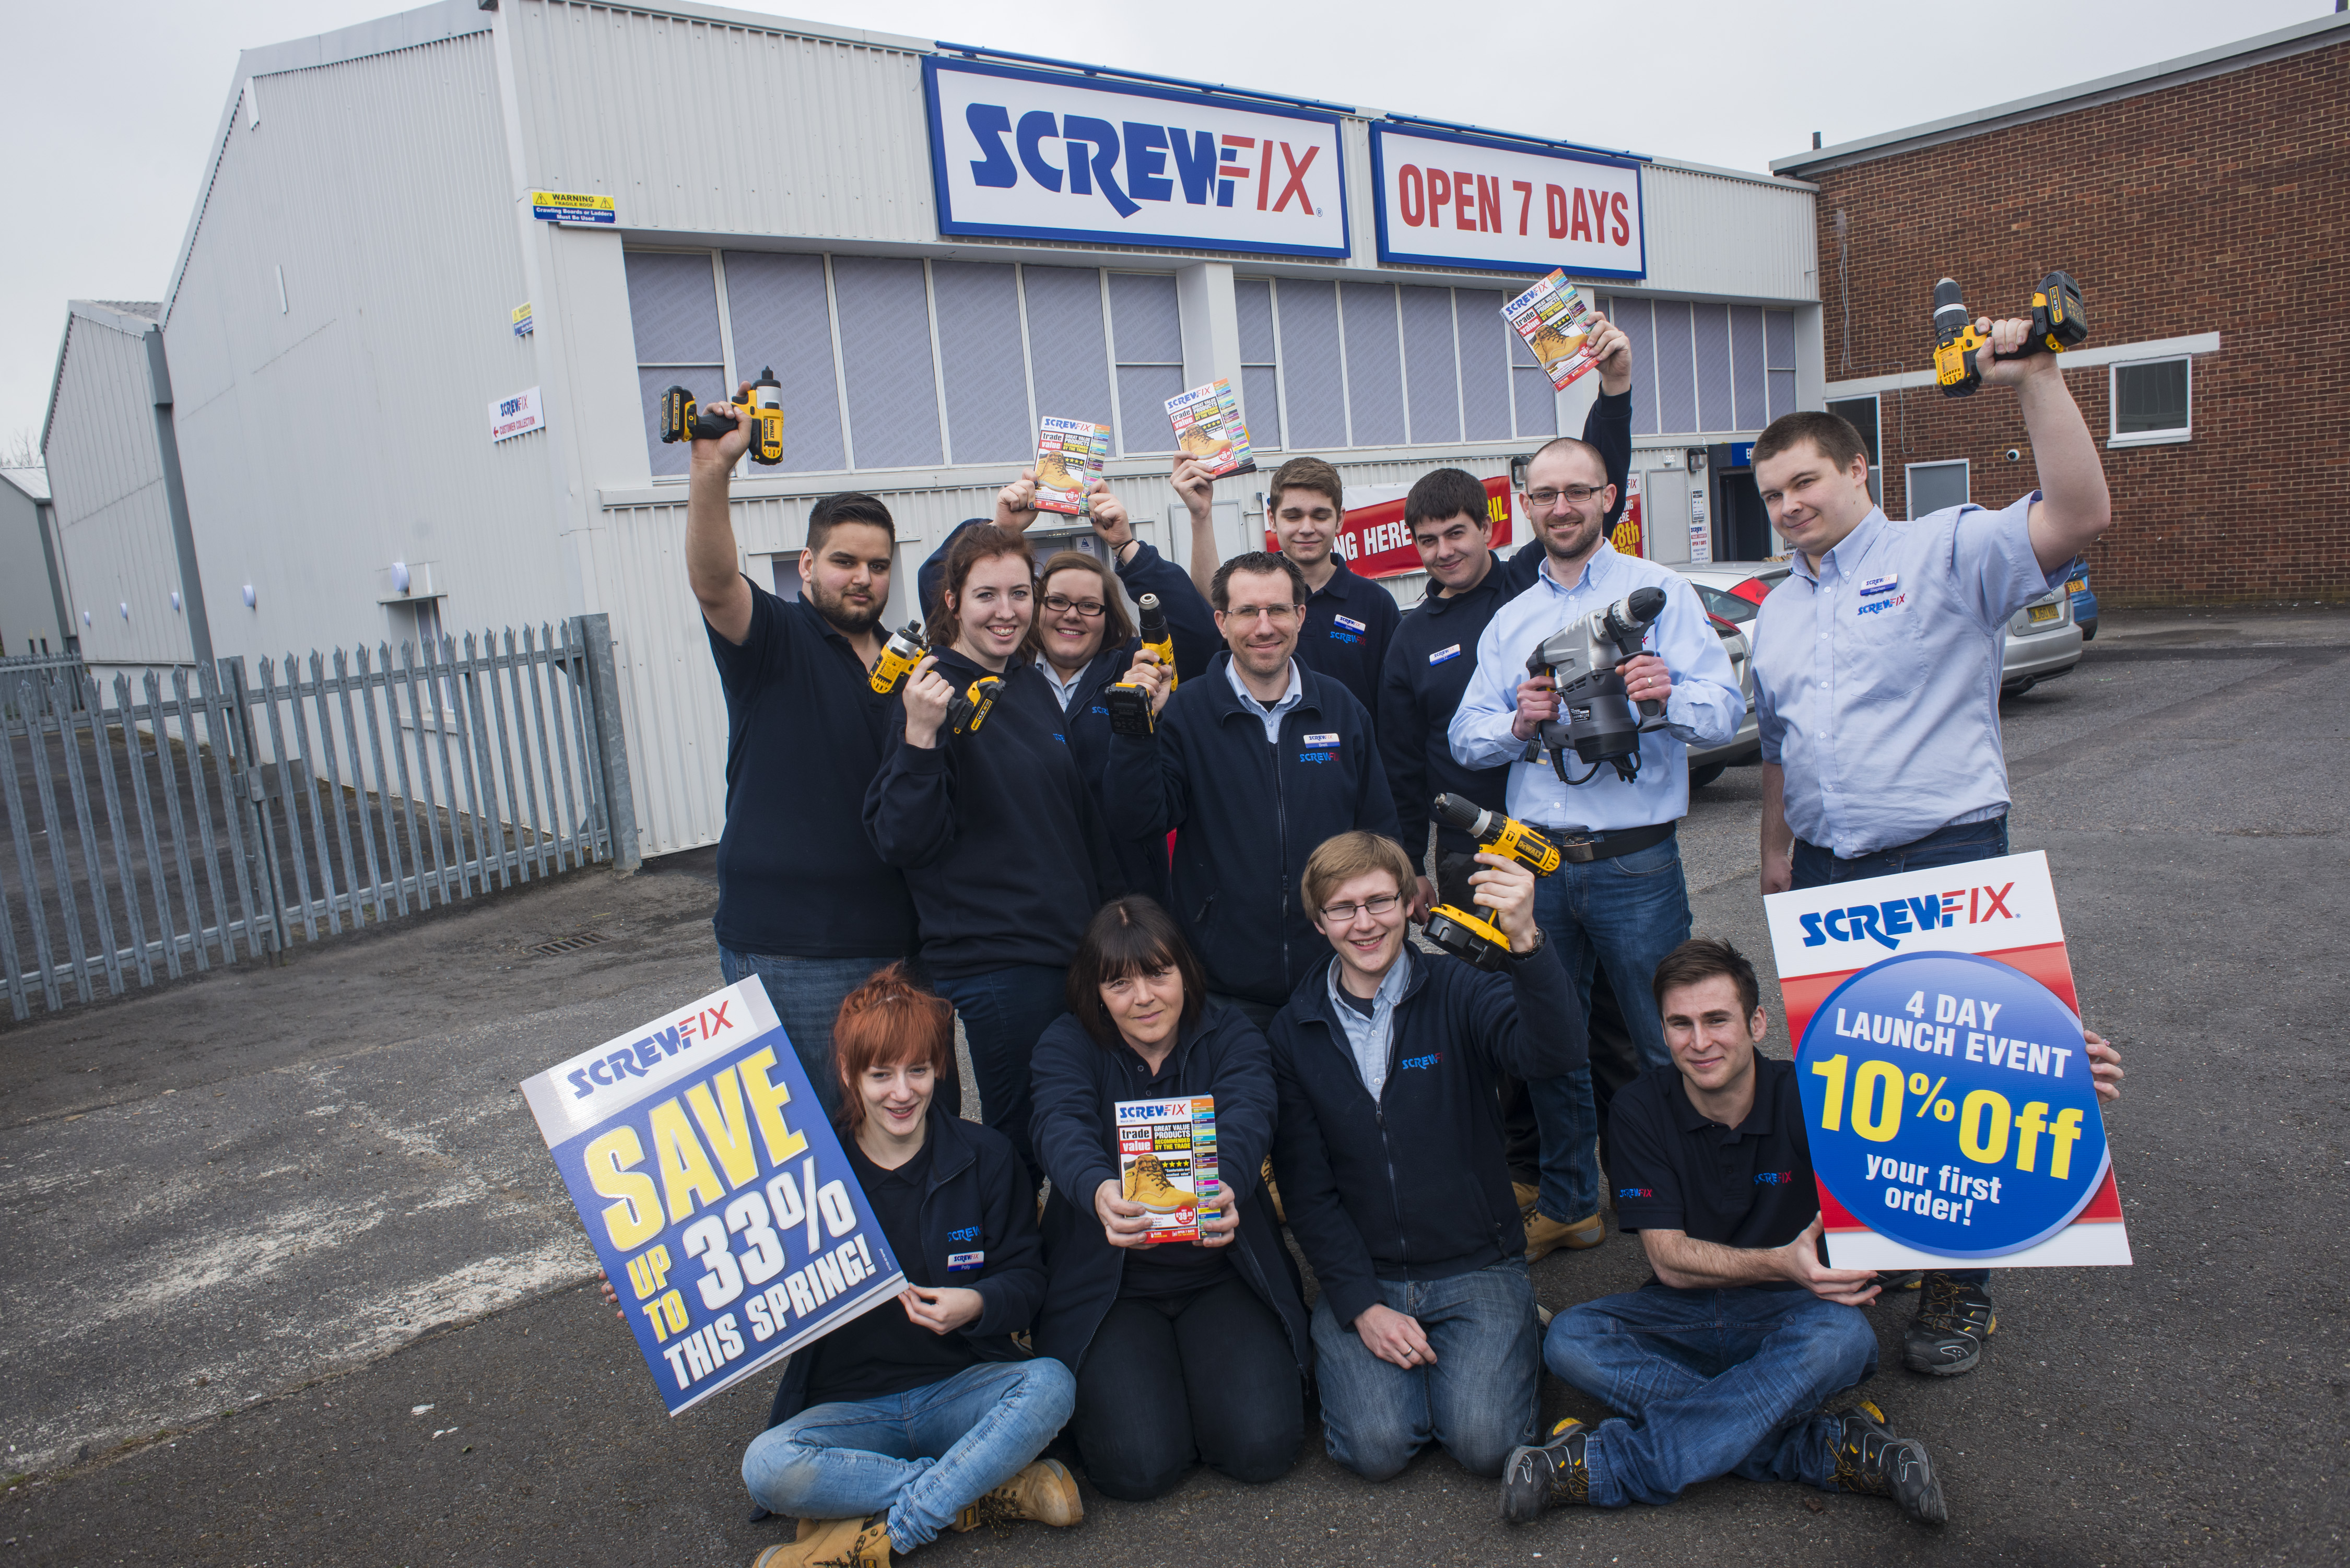 Haverhill’s first Screwfix store is declared a runaway success